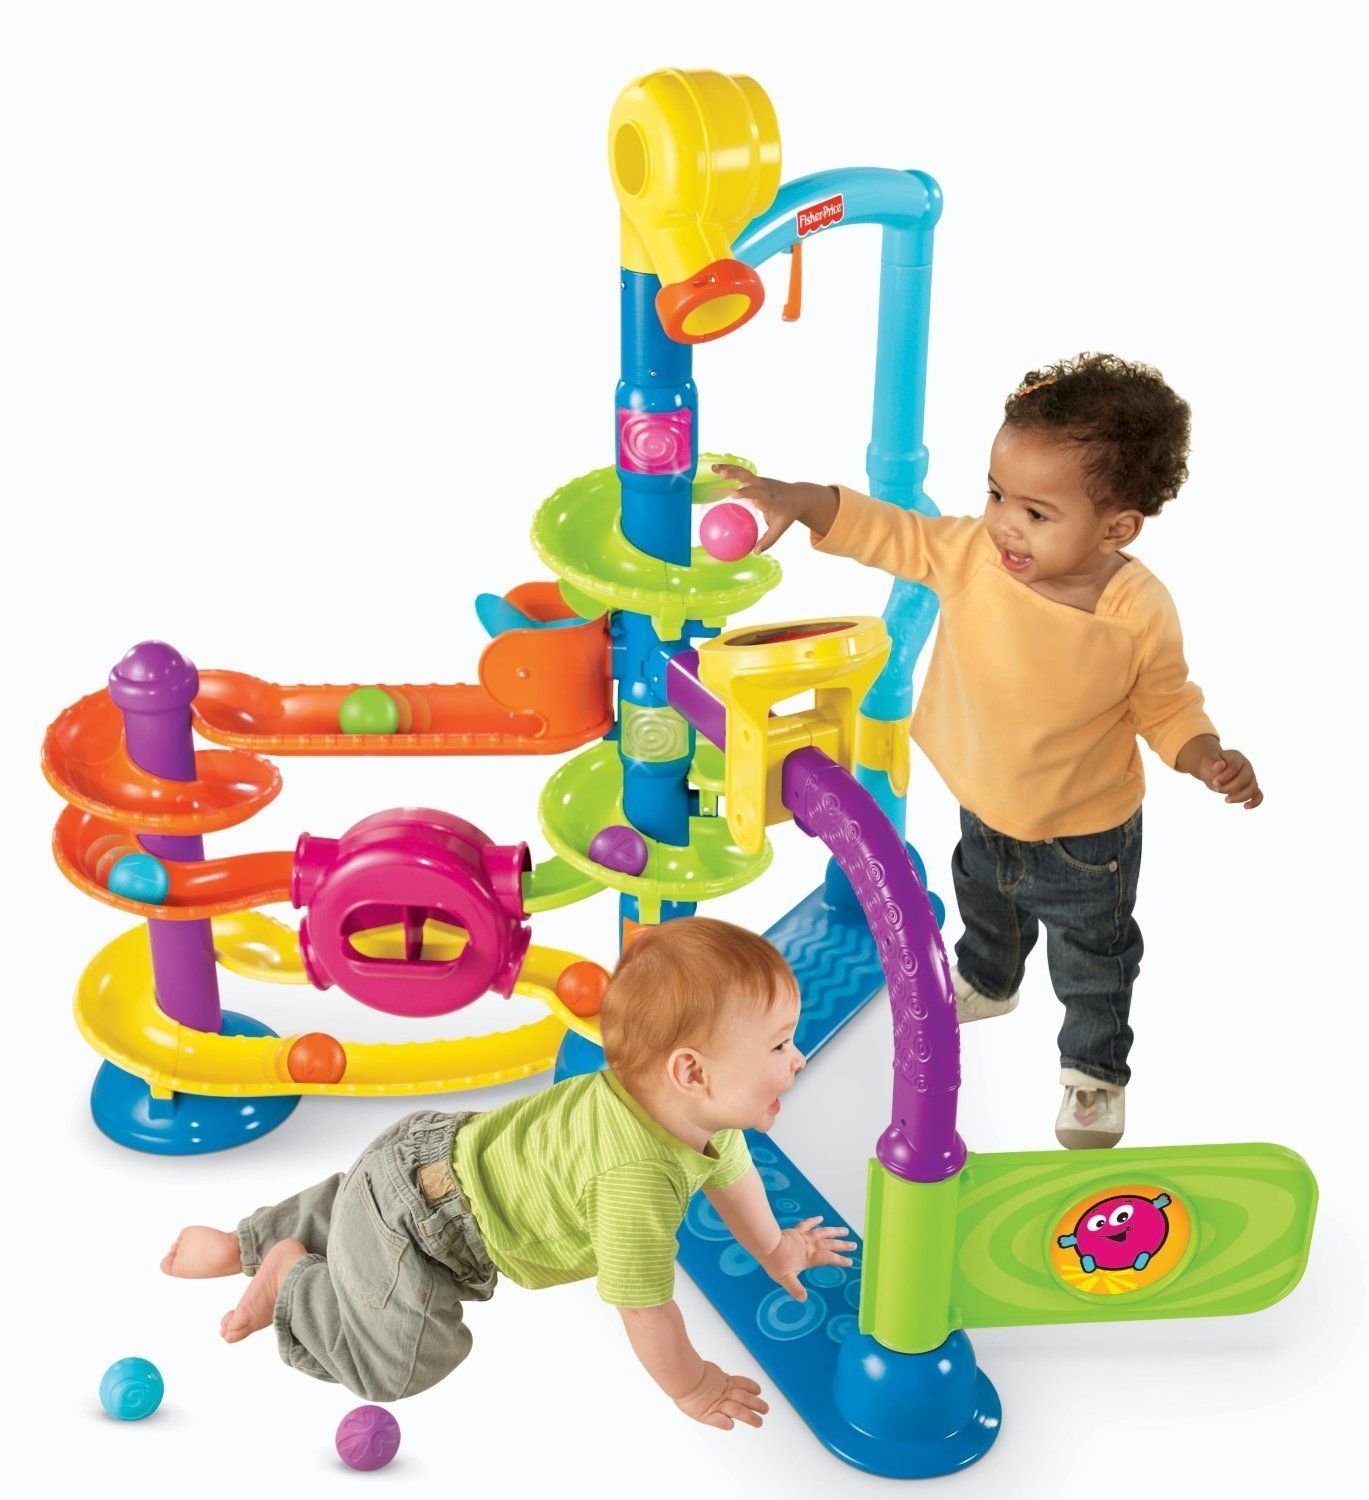 10 Cute Gift Ideas For A One Year Old Baby Girl amazon fisher price cruise and groove ballapalooza toys 1 2022